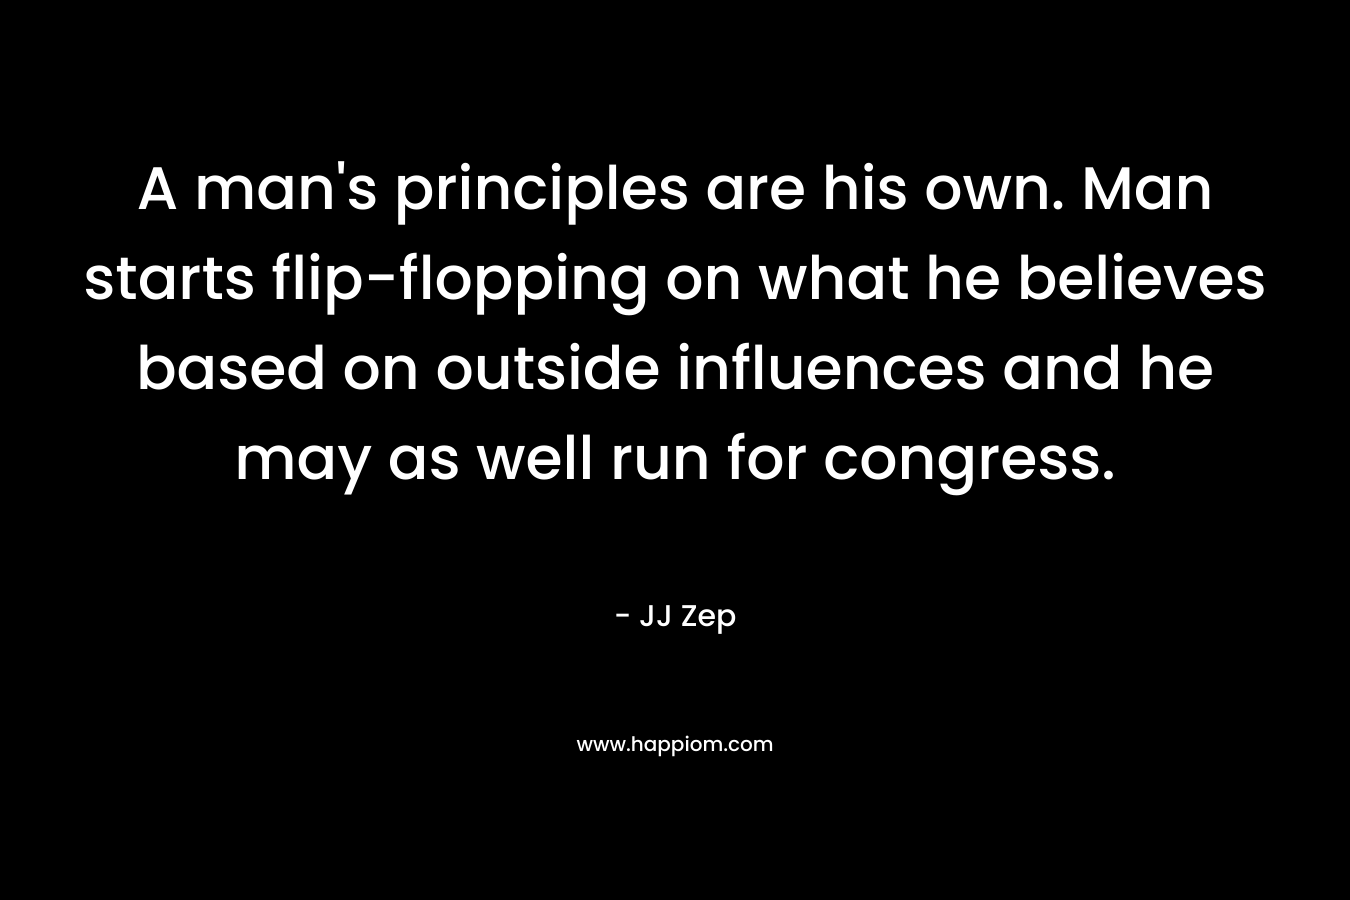 A man's principles are his own. Man starts flip-flopping on what he believes based on outside influences and he may as well run for congress.